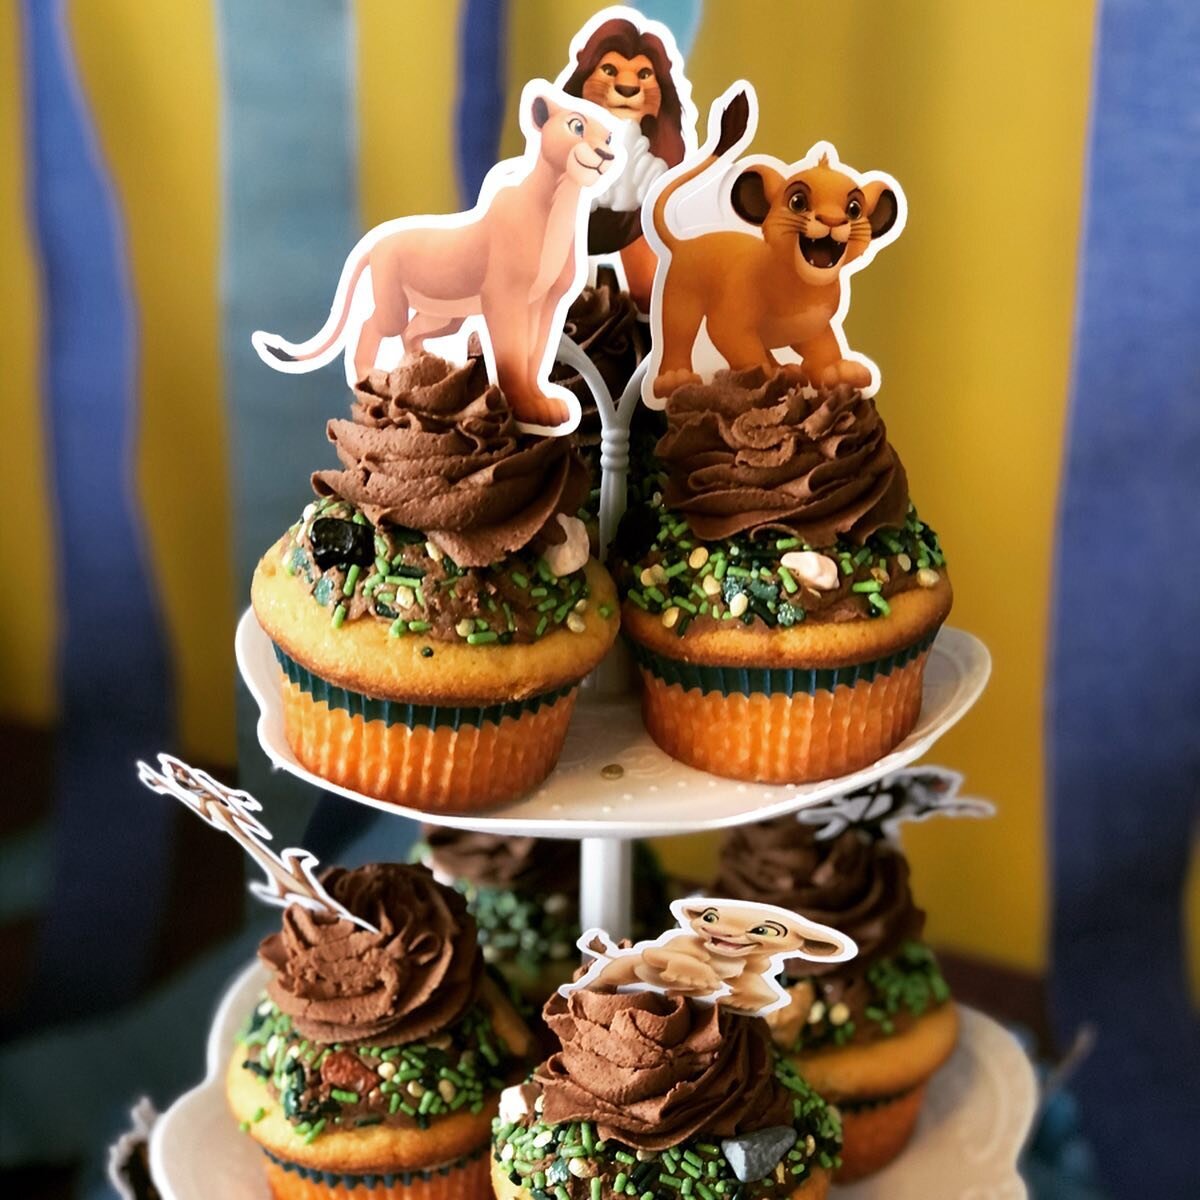 These #lionking themed cupcakes were so yummy we wished it was our birthday! This classic yet so so yummy chocolate and vanilla combination came together so perfectly it gave us major #hakunamatata! 
-
-
-

#disneycupcakes #cupcakes #disney #disneyfo